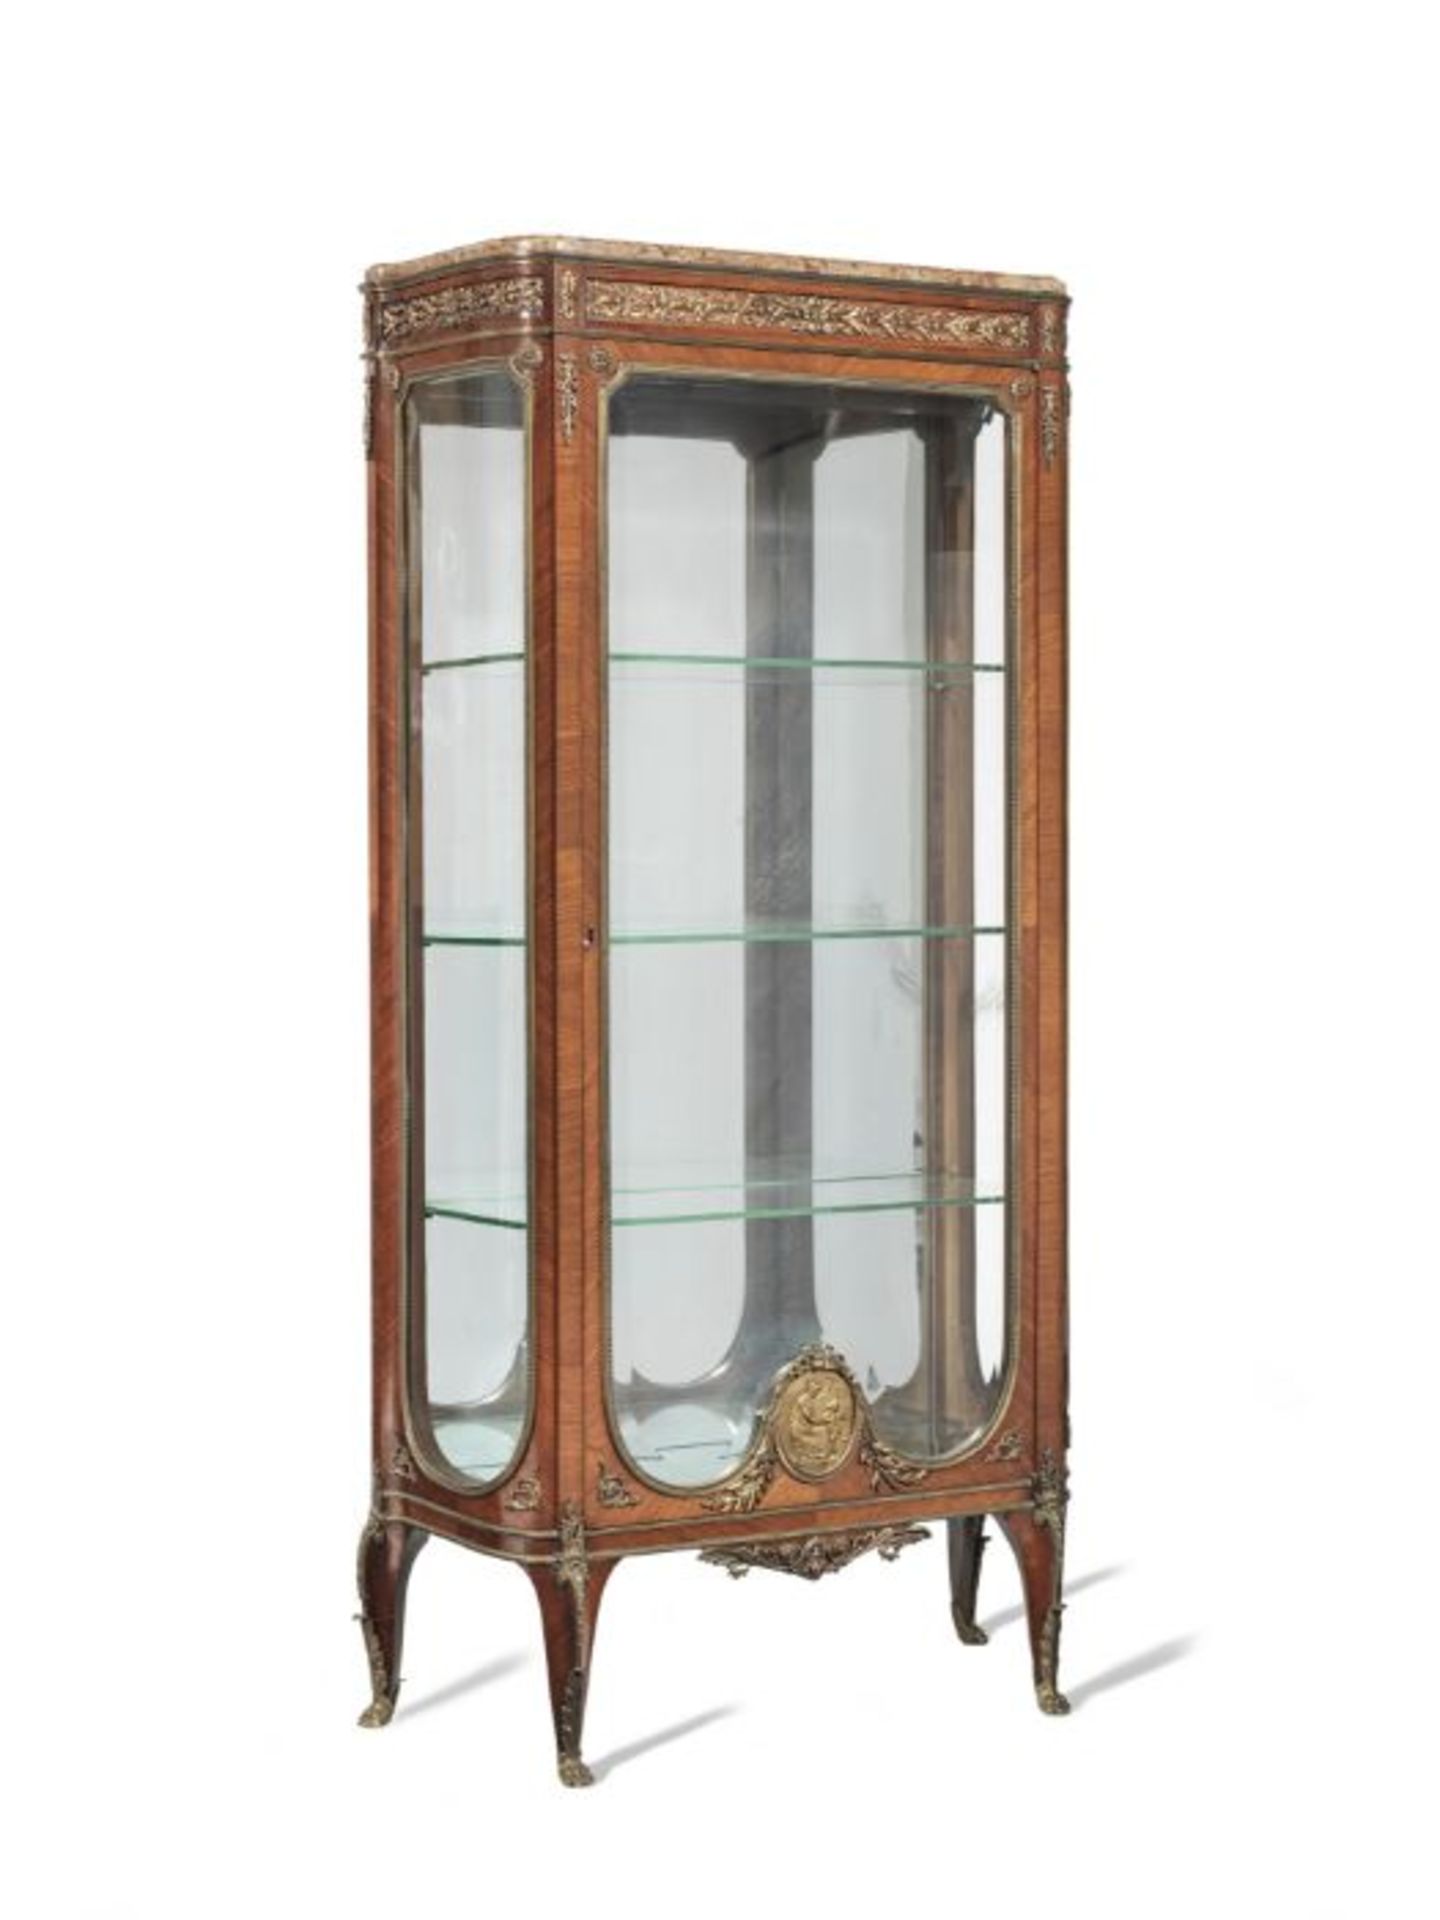 A 19th century French kingwood and gilt bronze mounted display cabinet